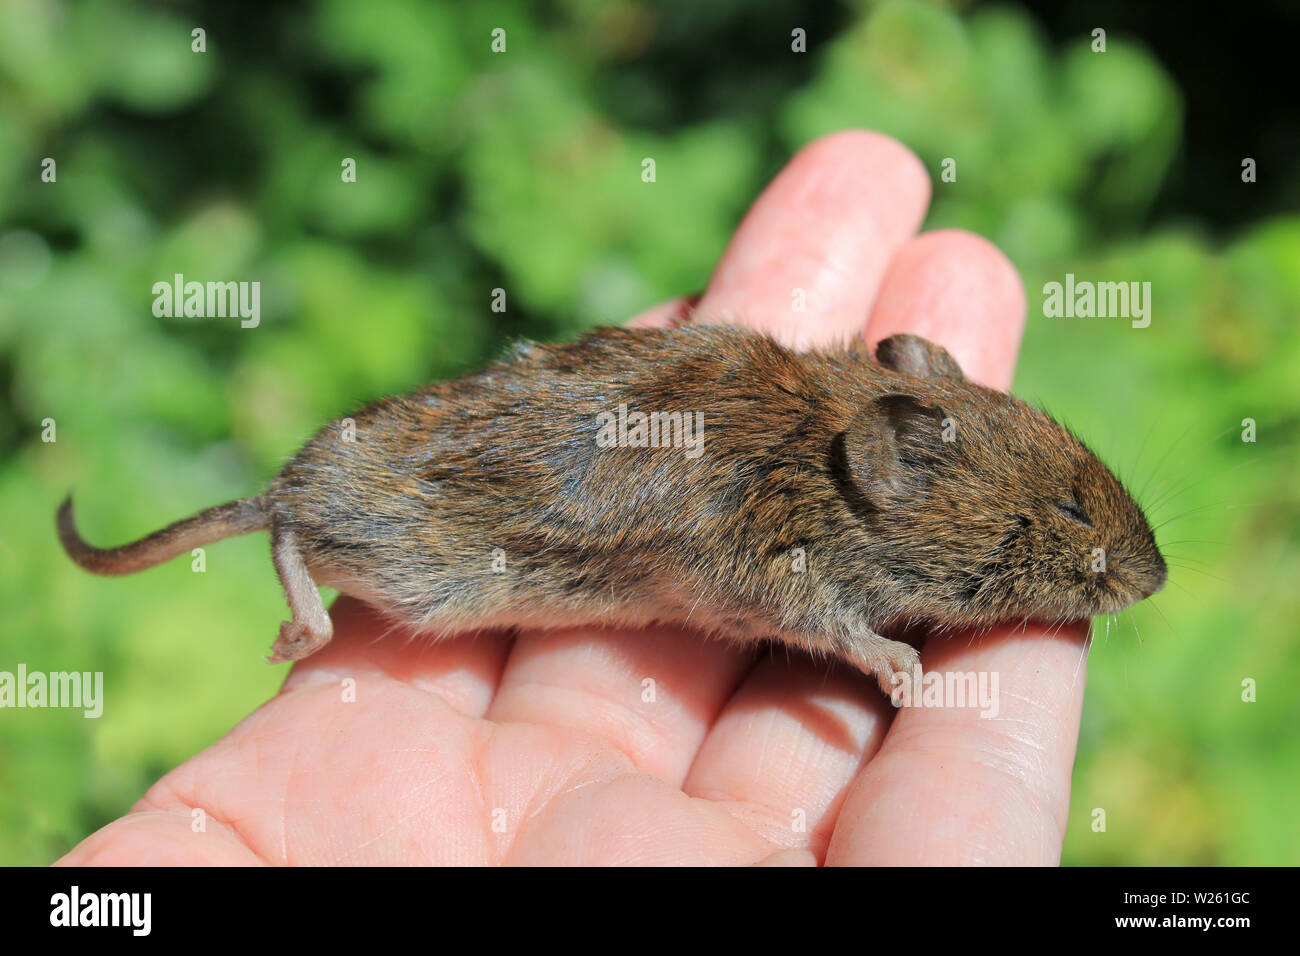 Field Vole a.k.a. Short-tailed vole Microtus agrestis Stock Photo